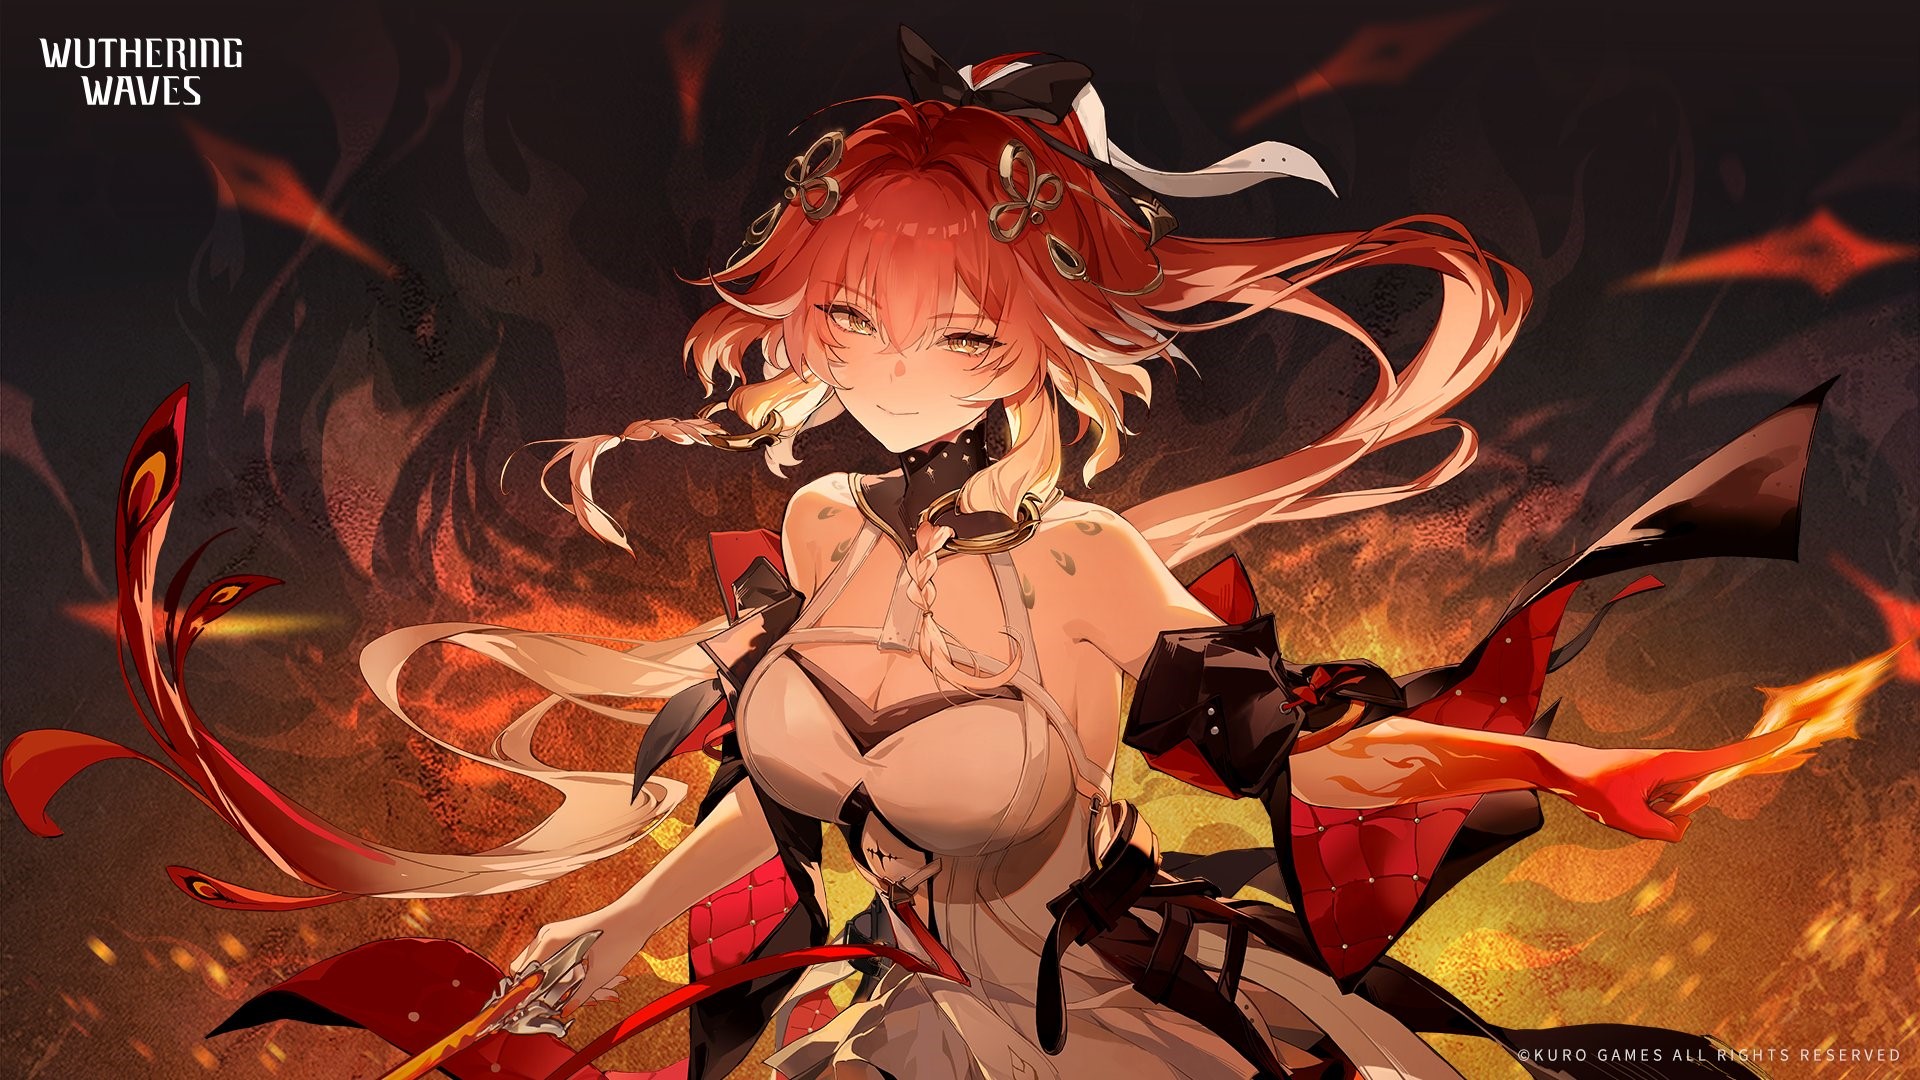 Anime 1920x1080 Wuthering Waves Changli (Wuthering Waves) smiling fiery fiery hair